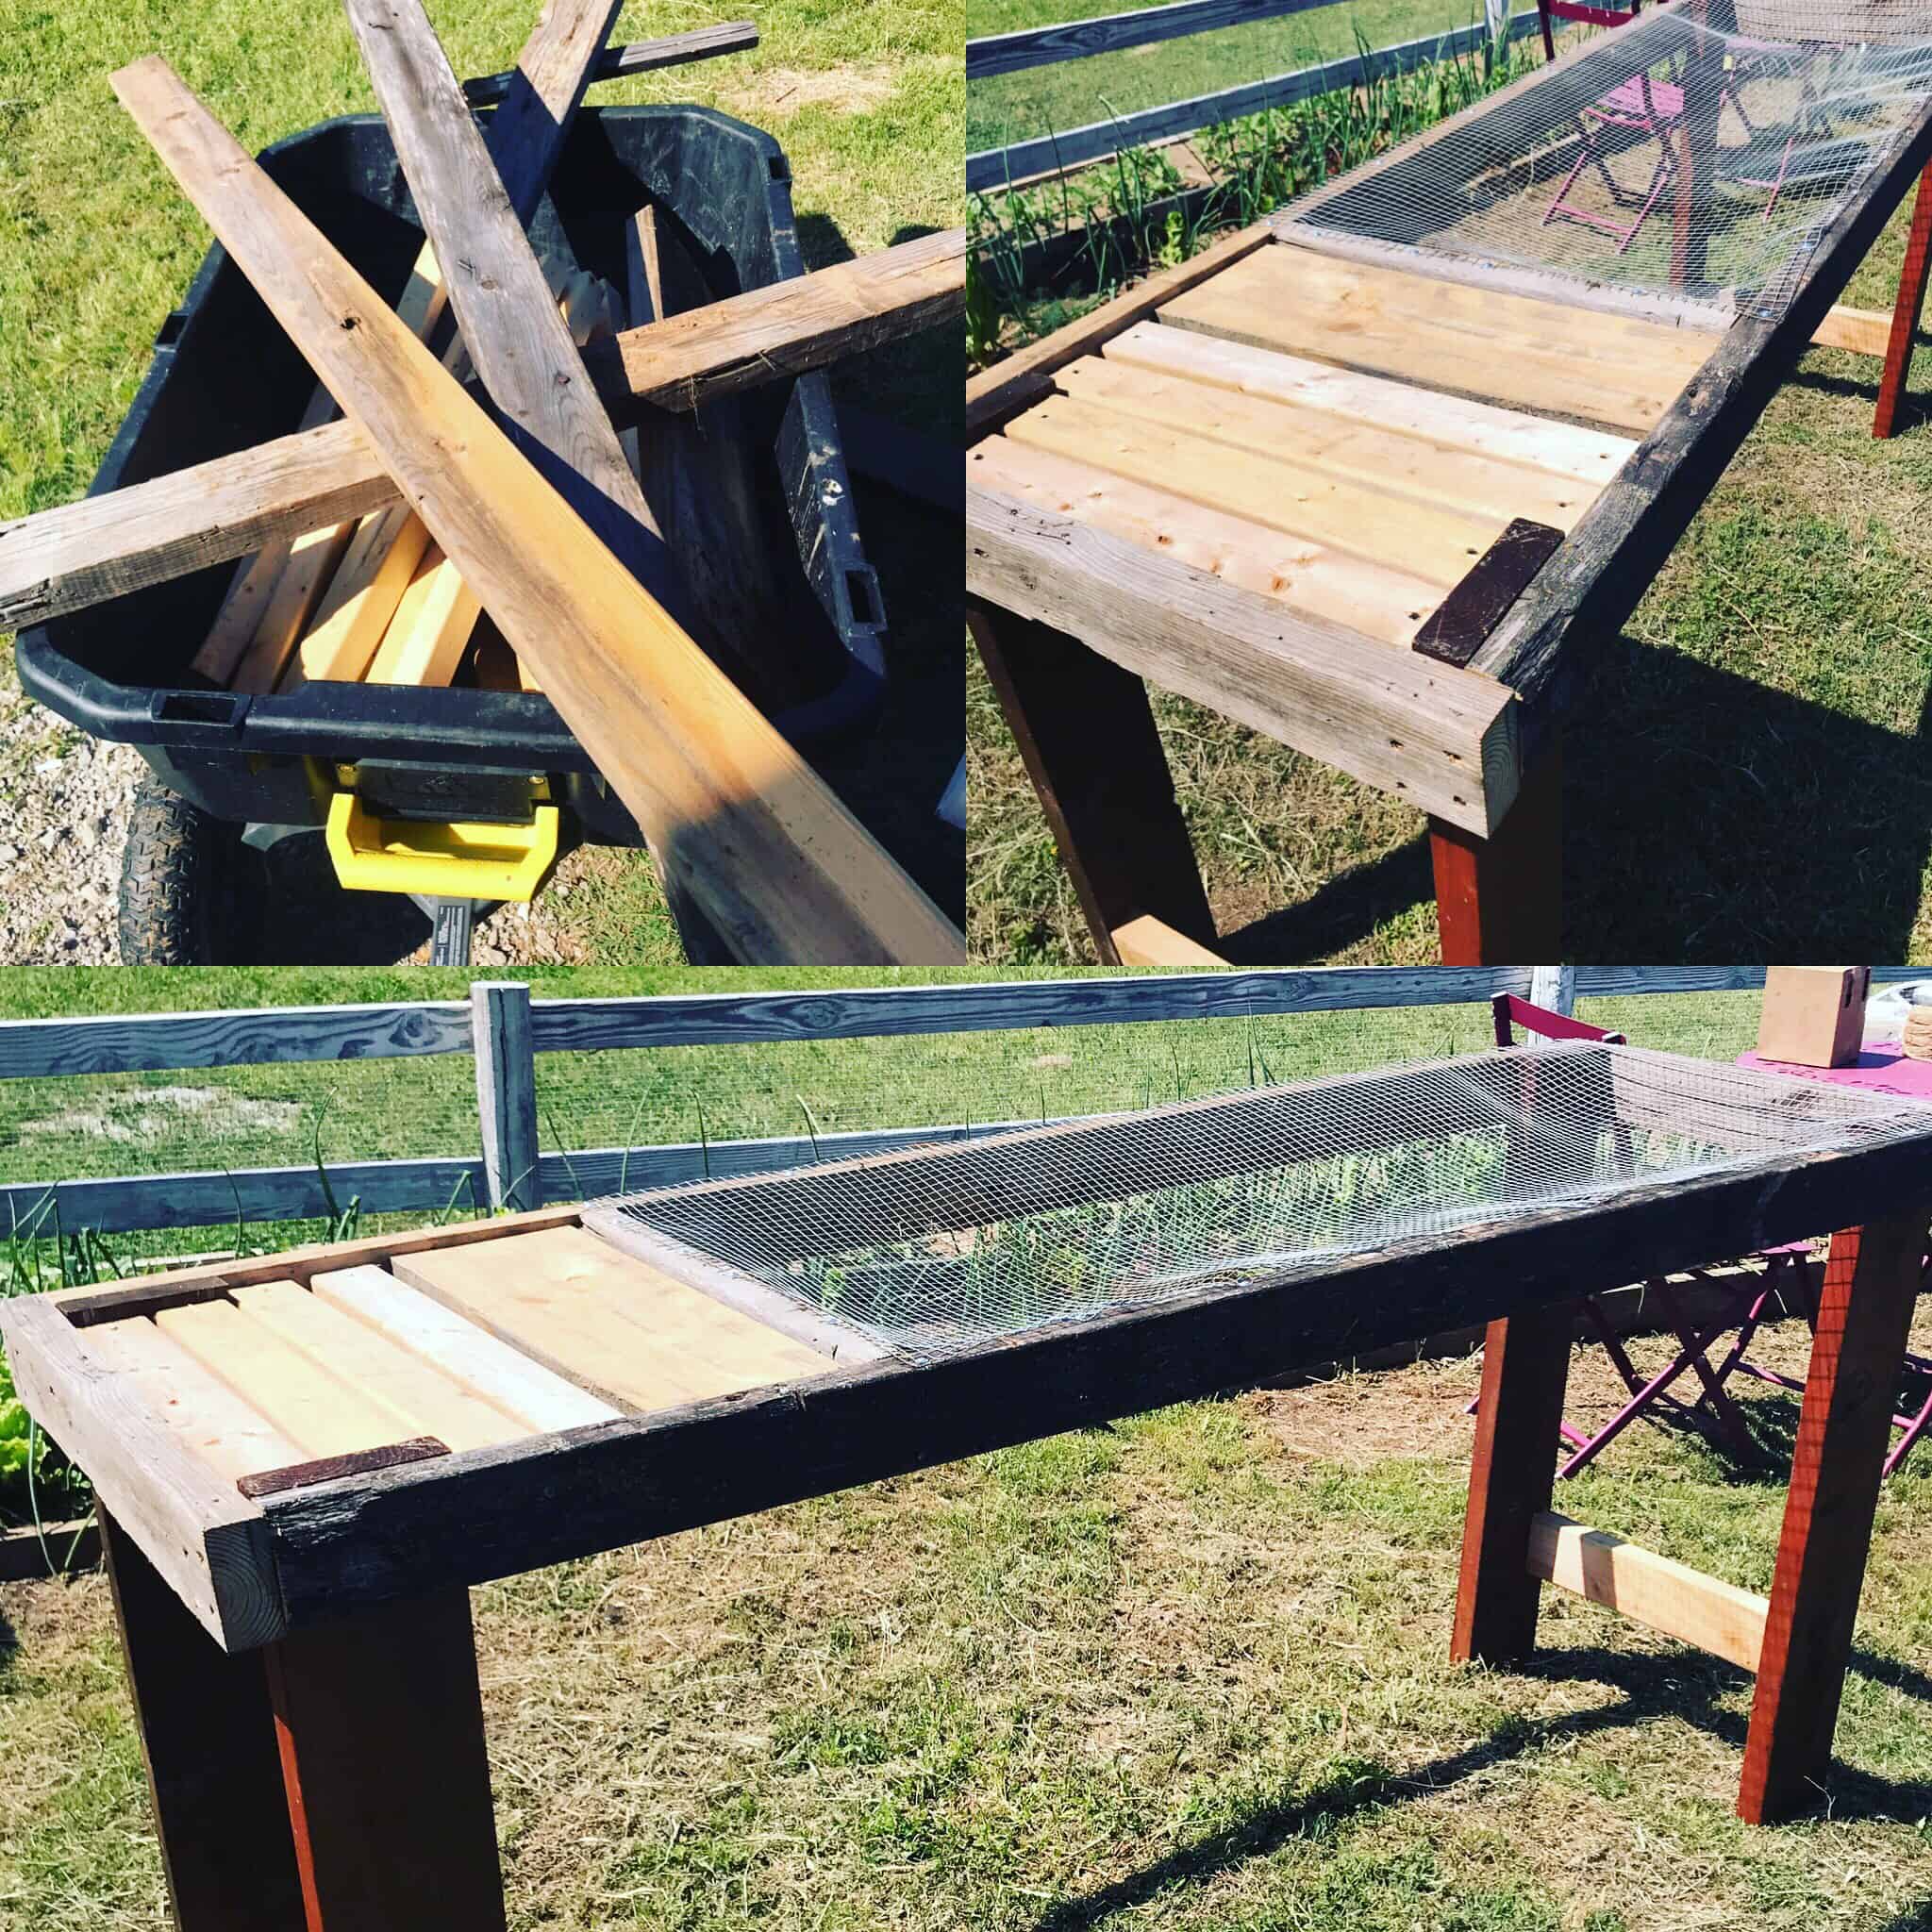 Expert How-to; Build an Easy DIY Garden Washing Station